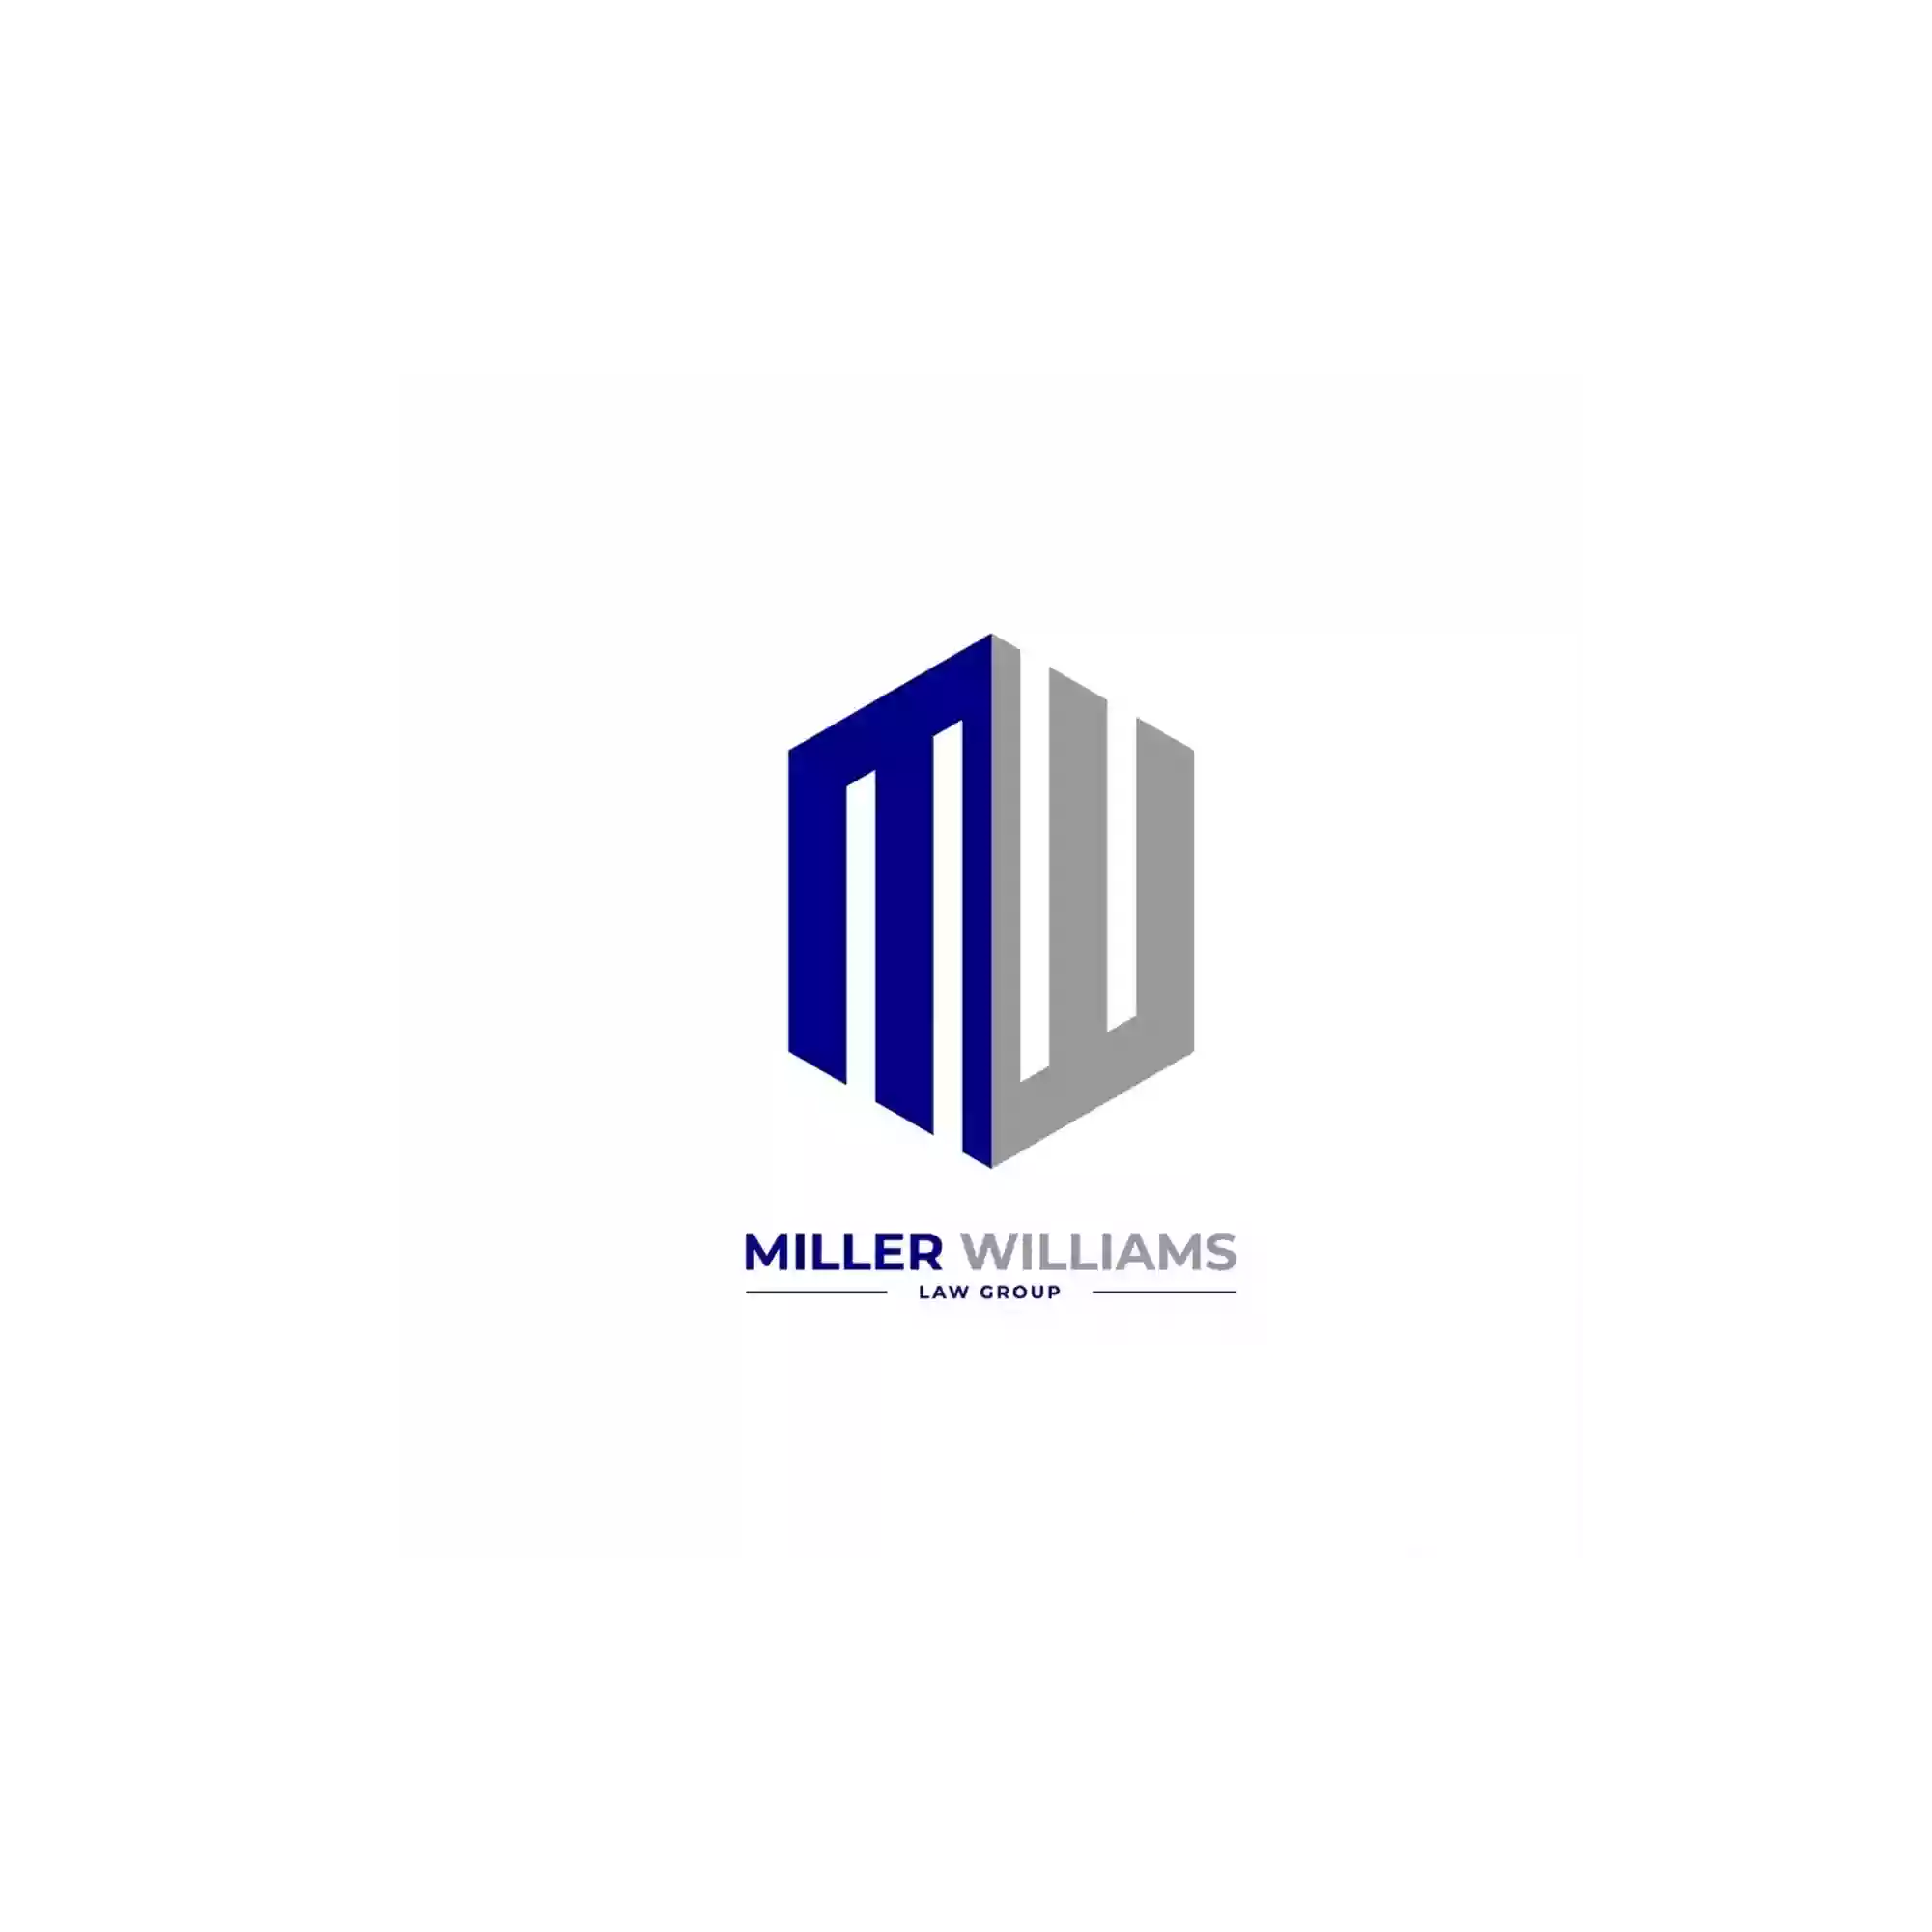 The Miller Williams Law Group